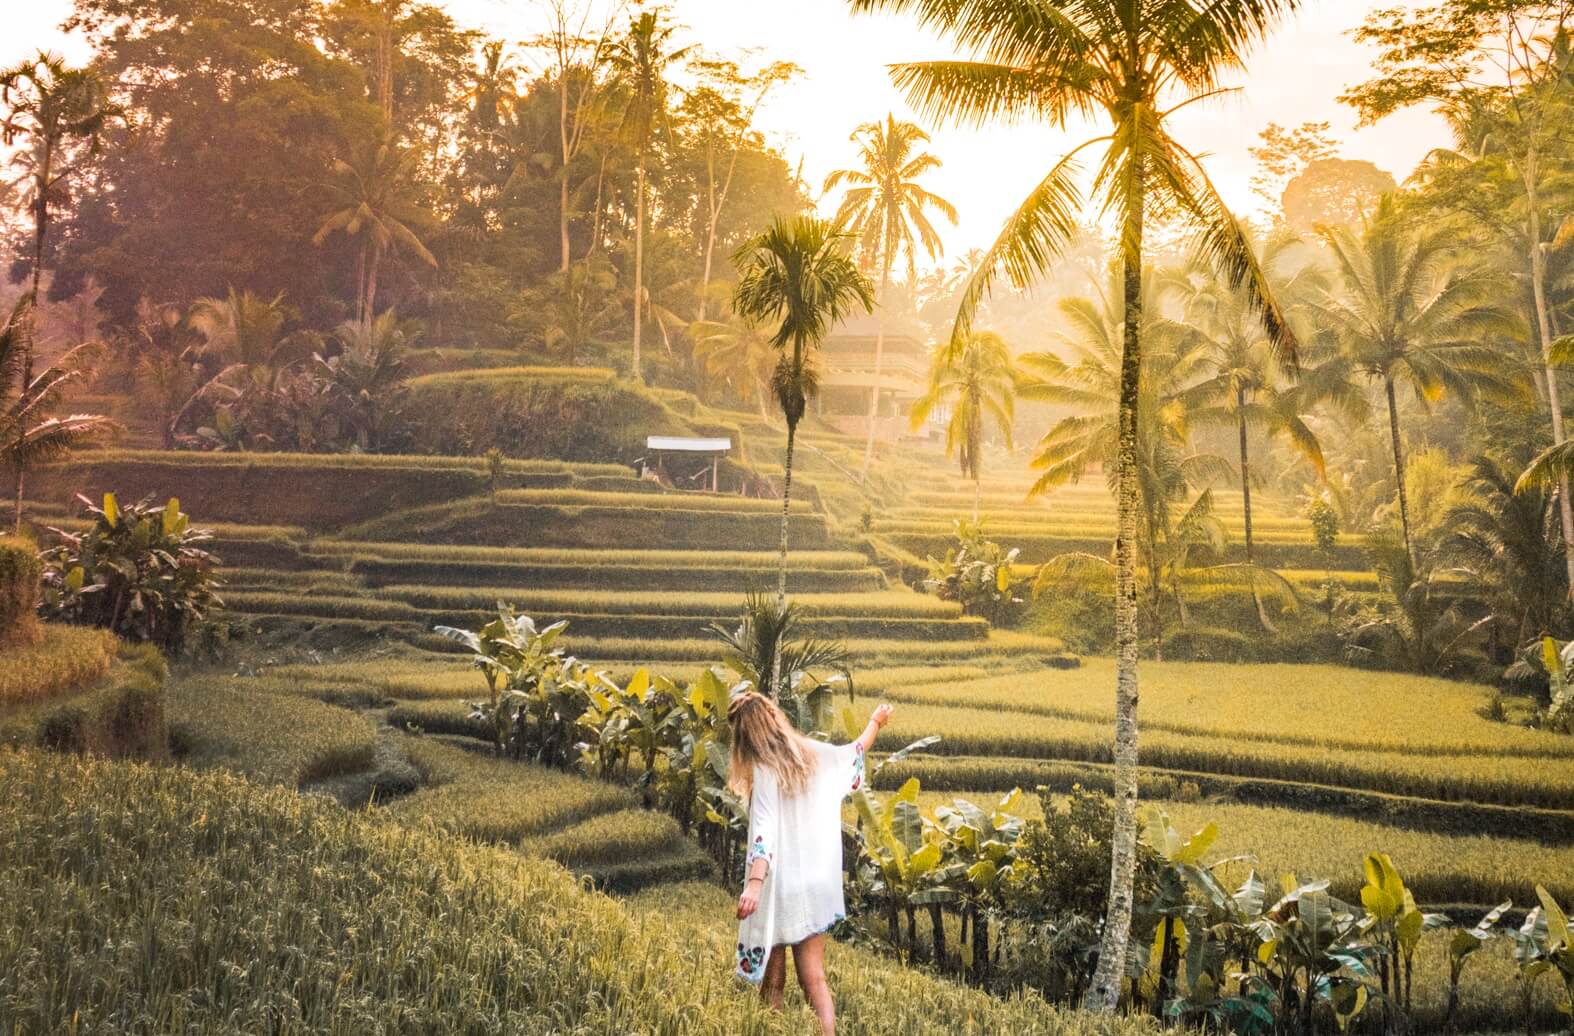 8 Things You Must Do in Bali, Indonesia